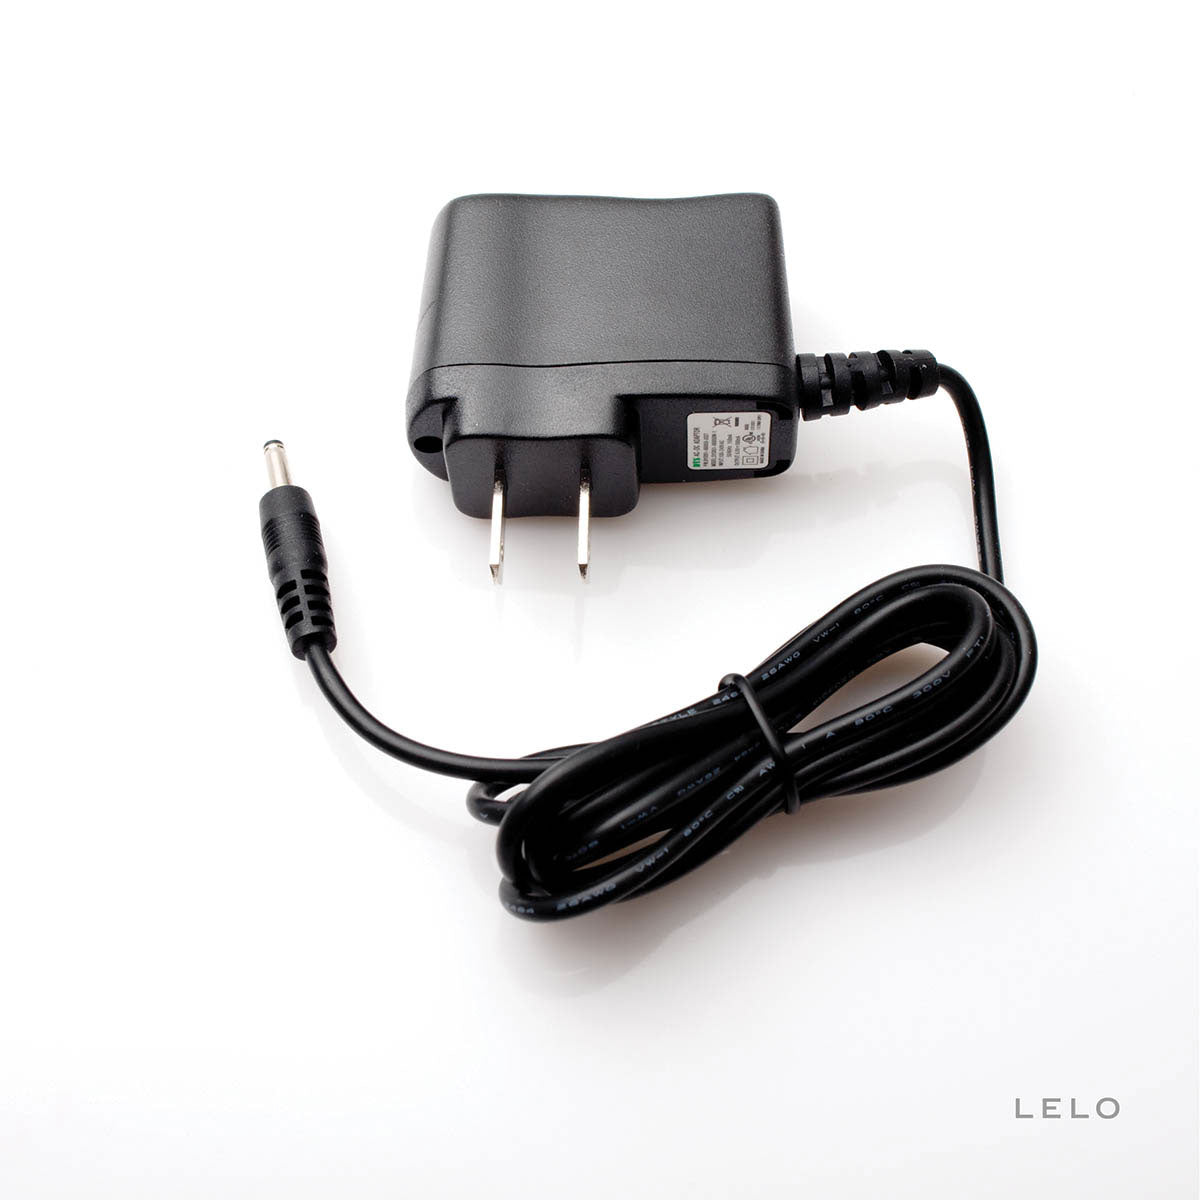 LELO Charger - USA Only